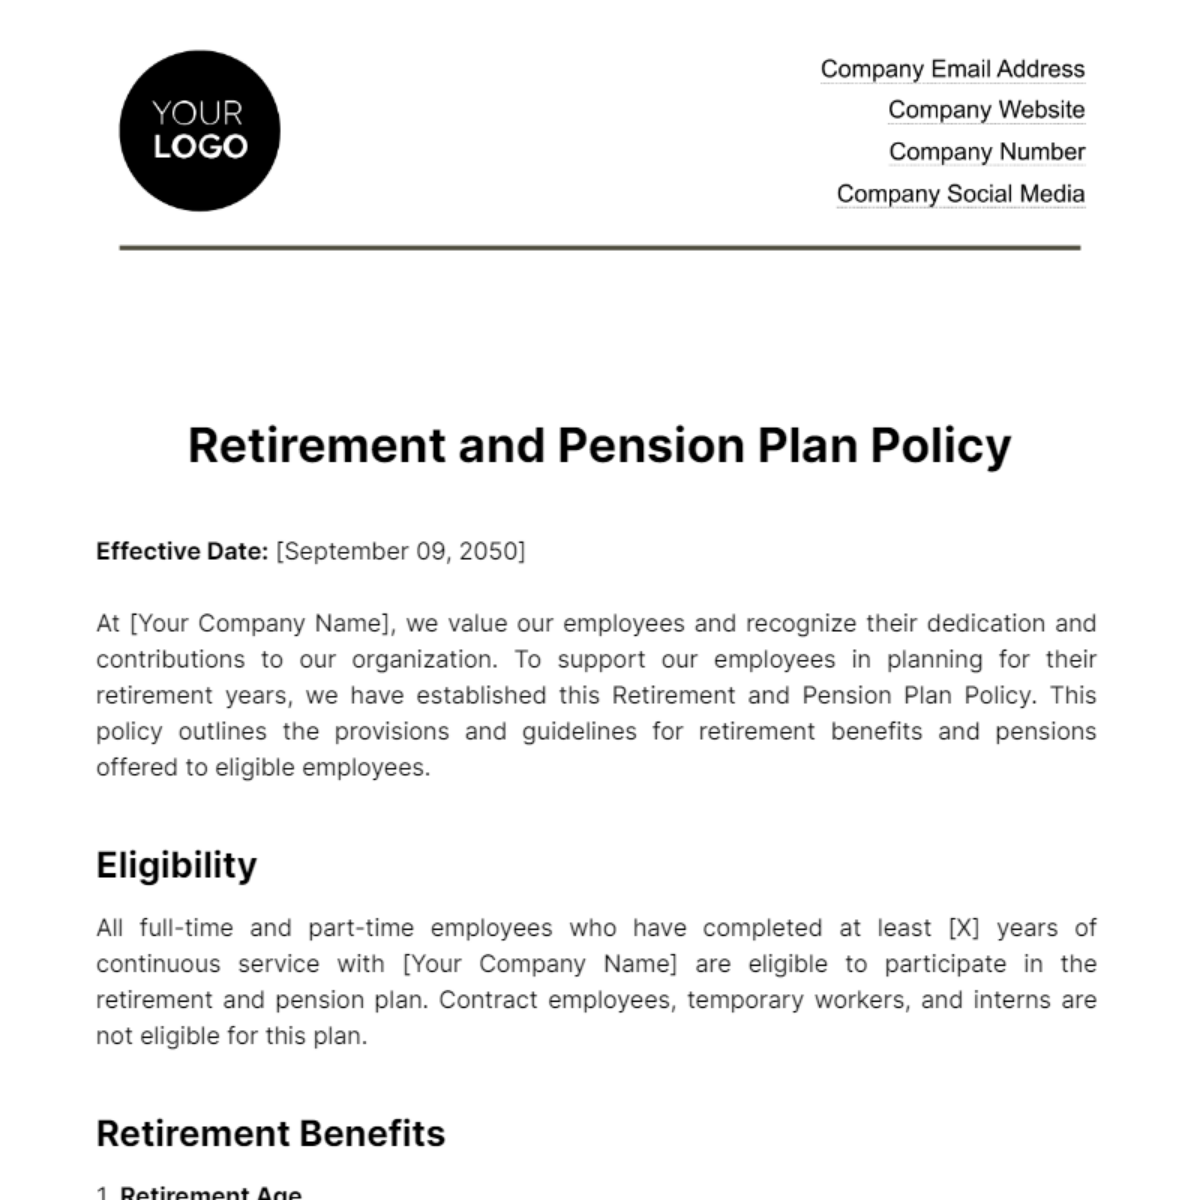 Free Retirement and Pension Plan Policy HR Template